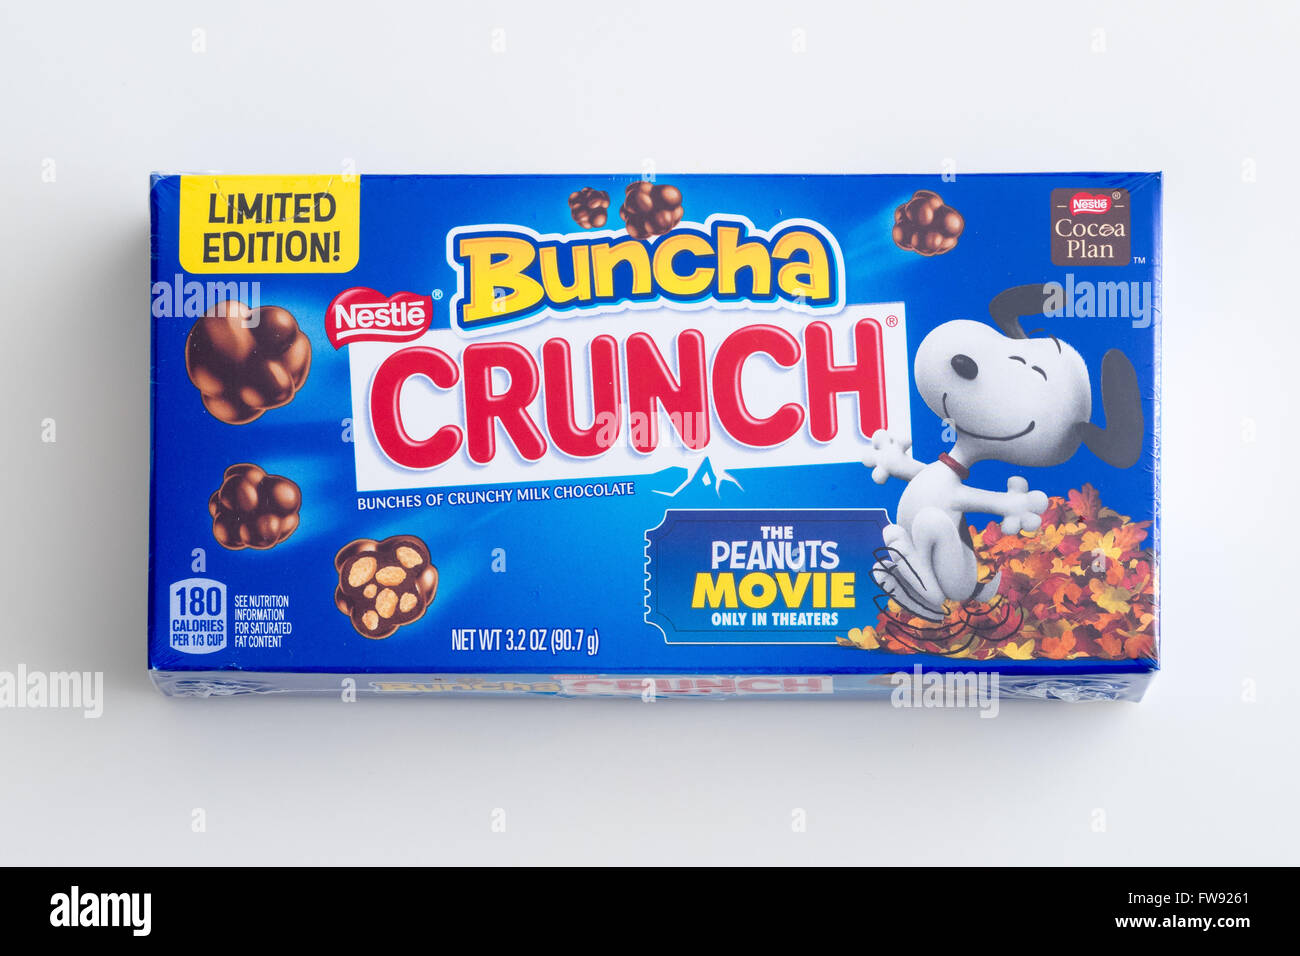 A theatre box of Nestlé Buncha Crunch candy. Limited edition Peanuts Movie (Snoopy) box shown. Stock Photo